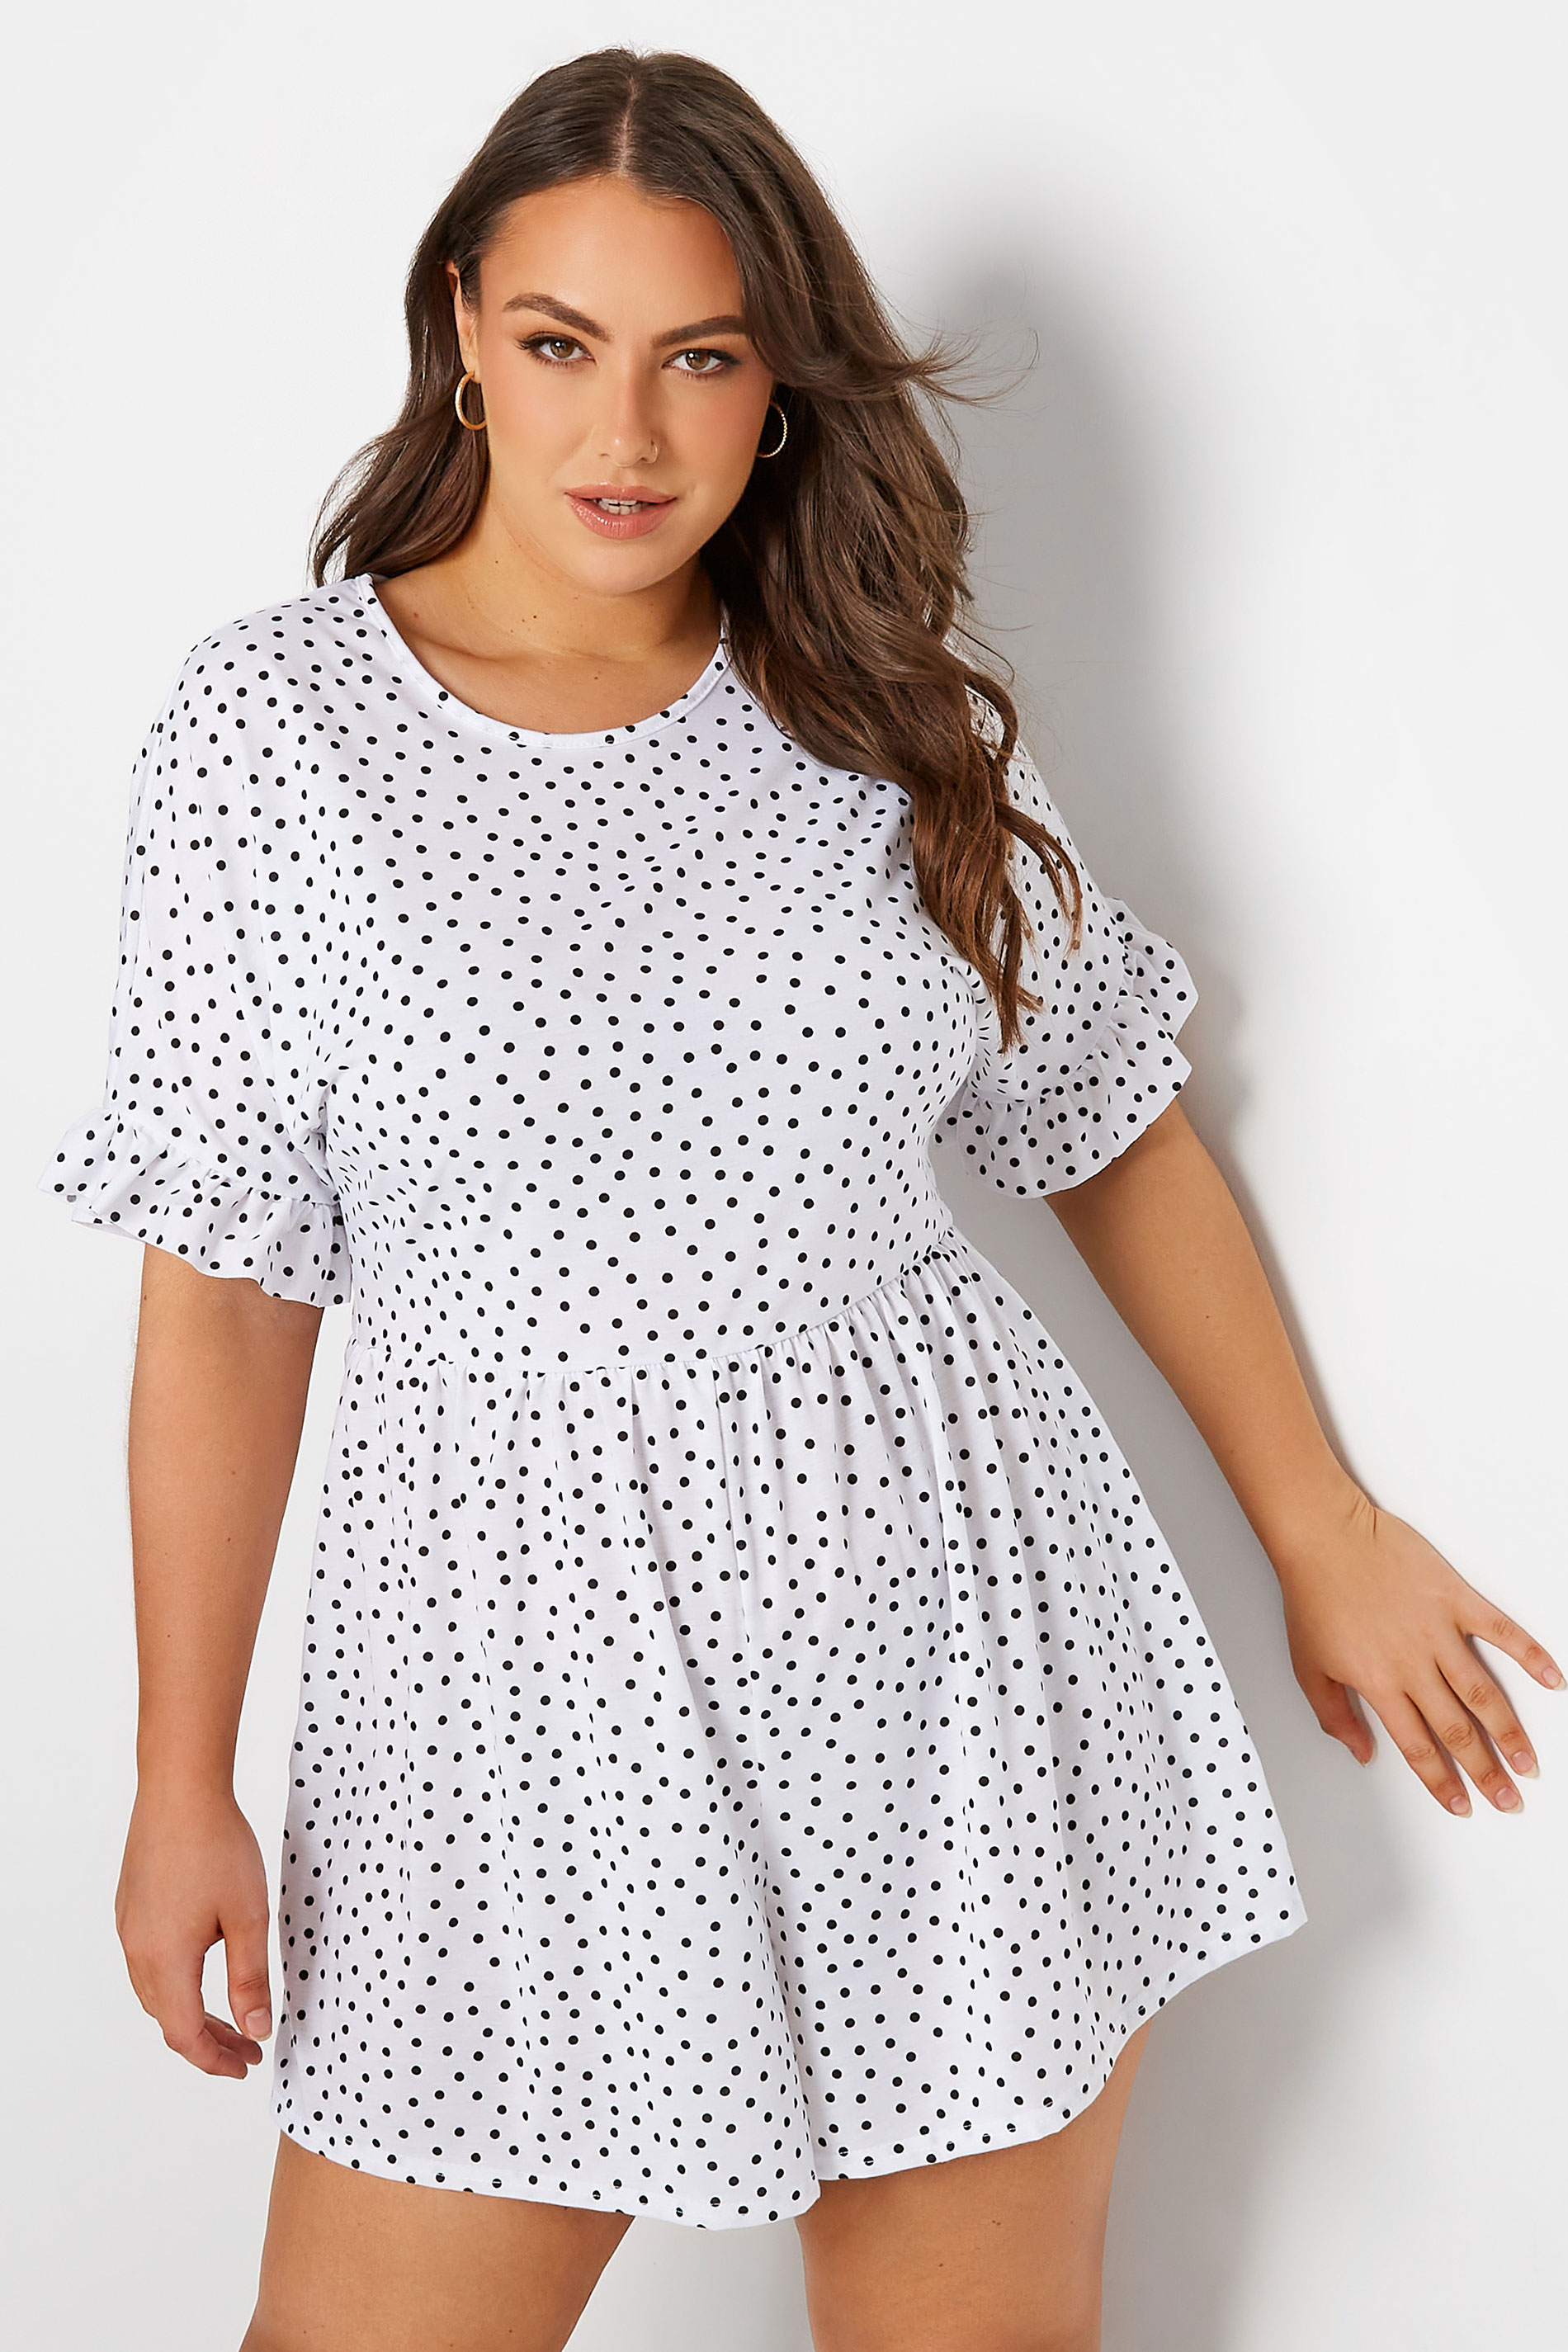 LIMITED COLLECTION Curve White & Black Polka Dot Playsuit_A.jpg